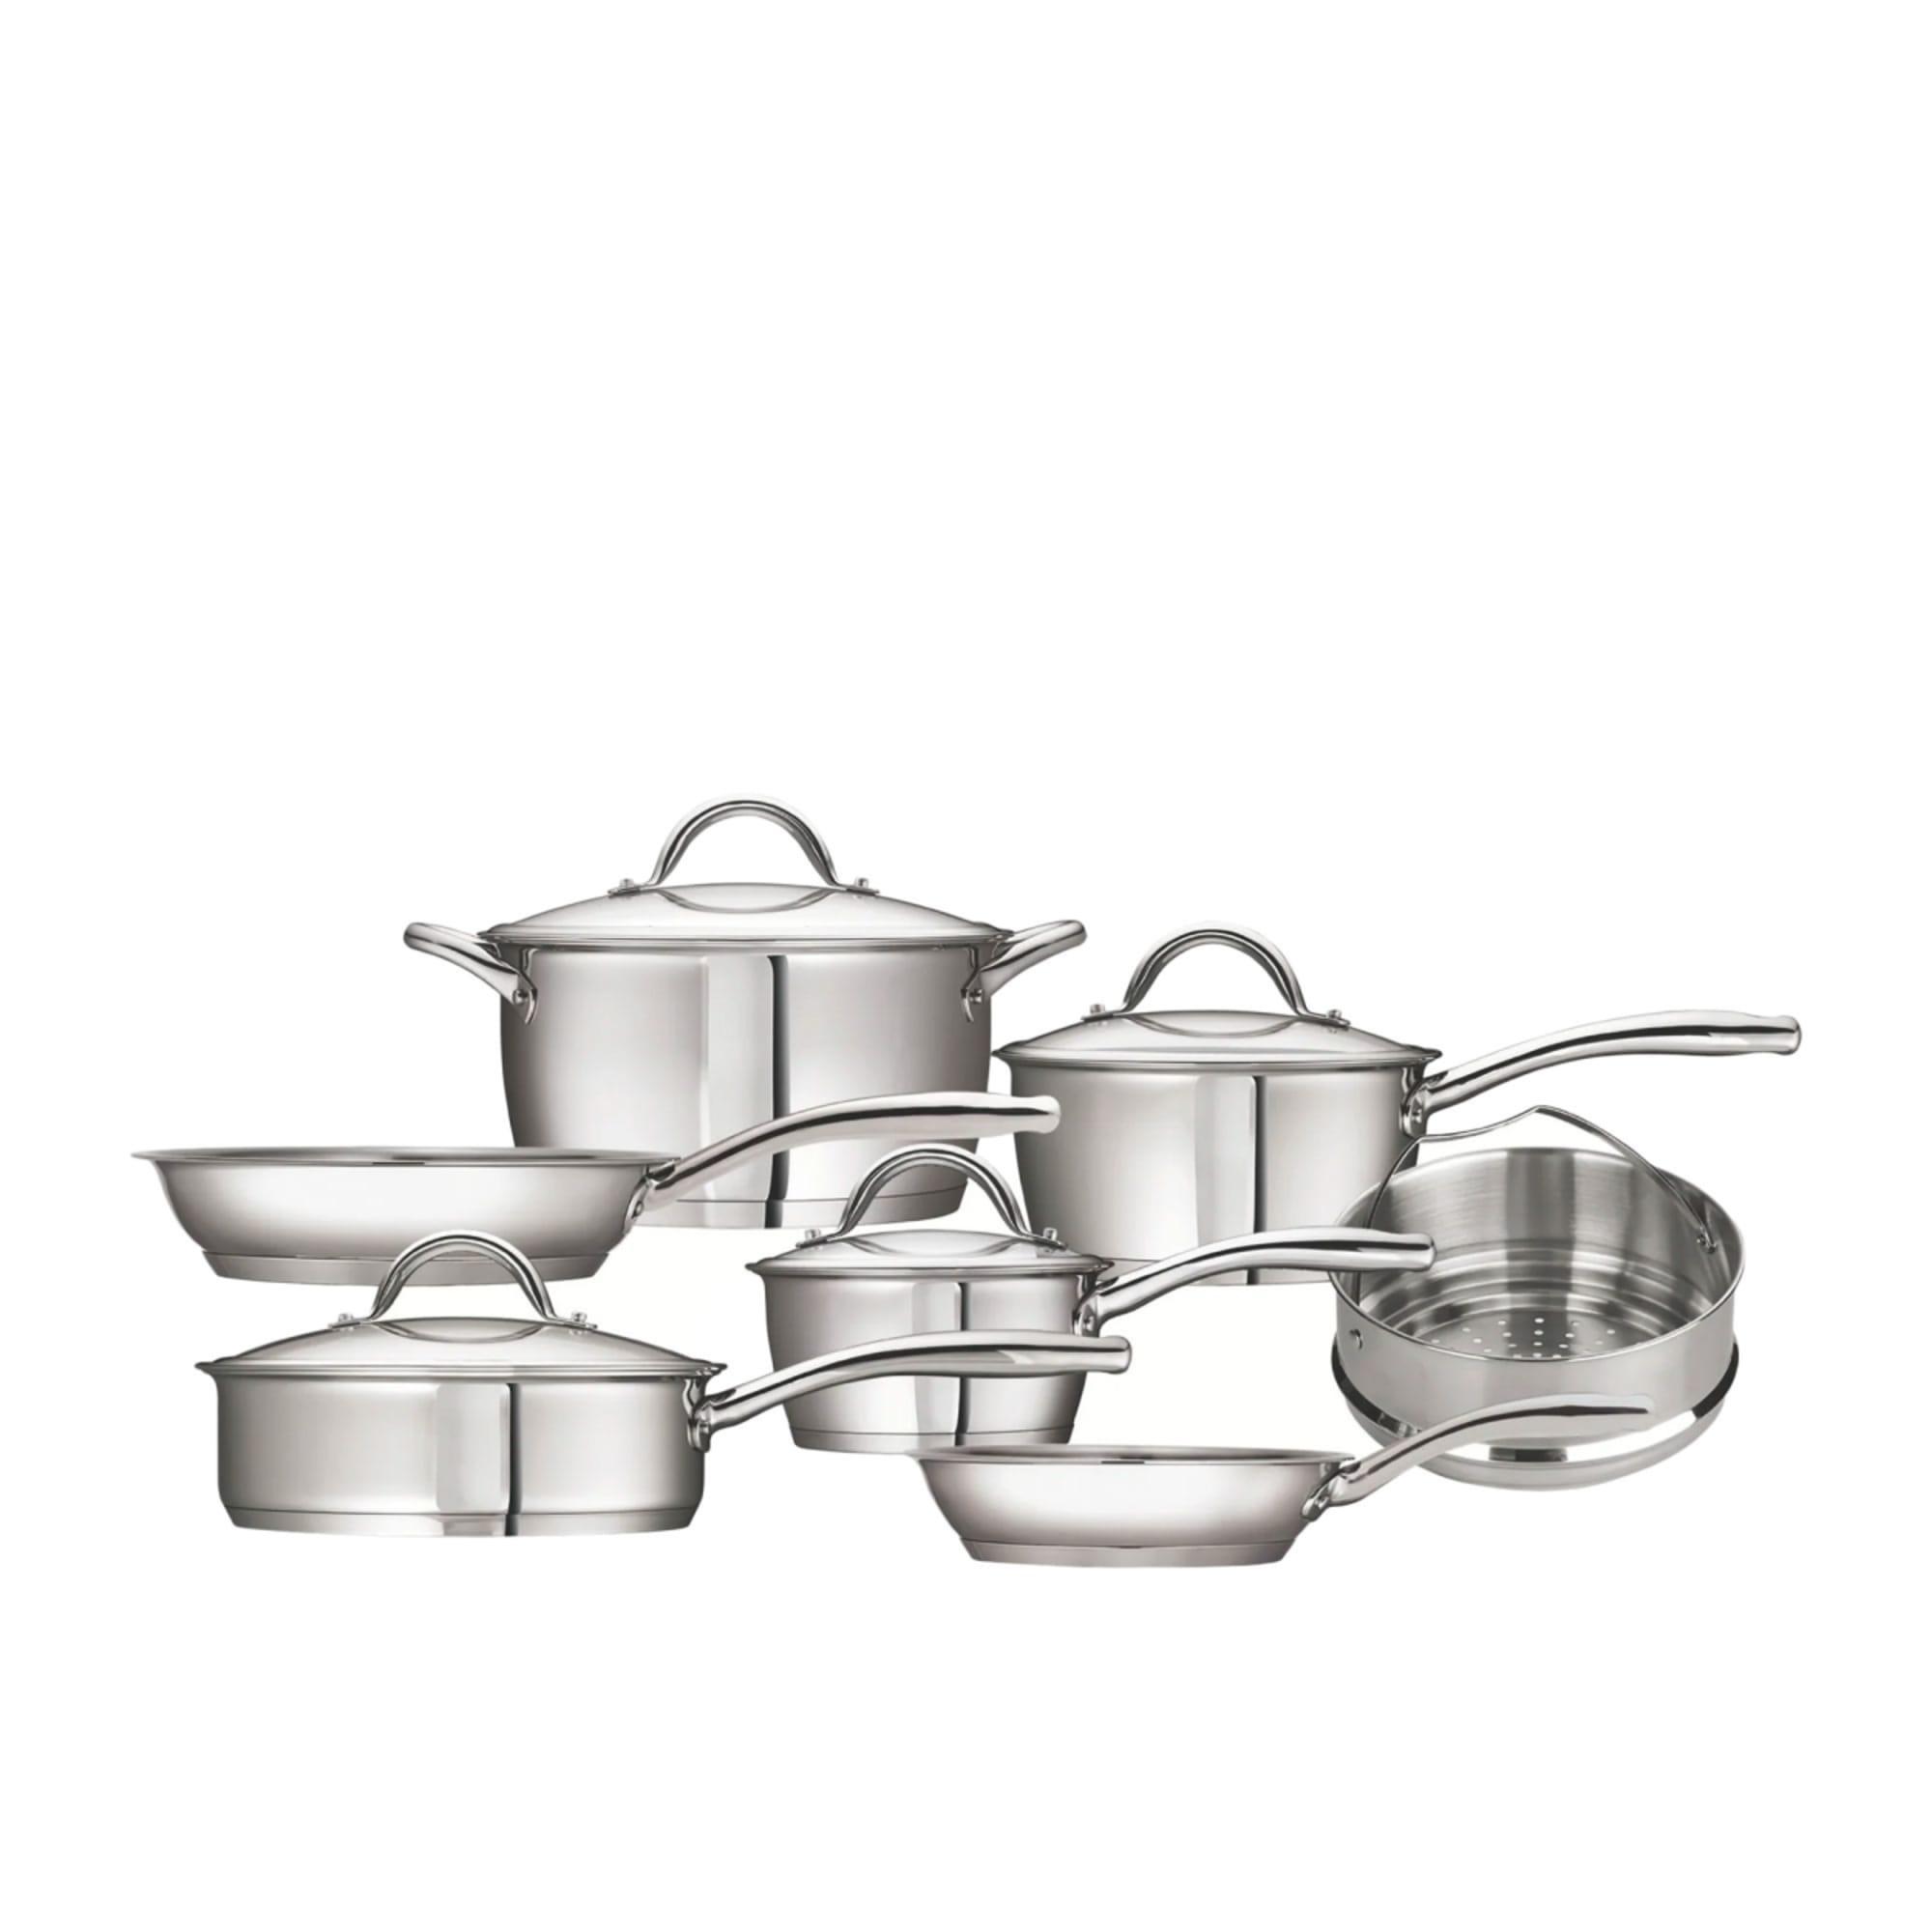 Tramontina 7pc Stainless Steel Cookware Set Image 1